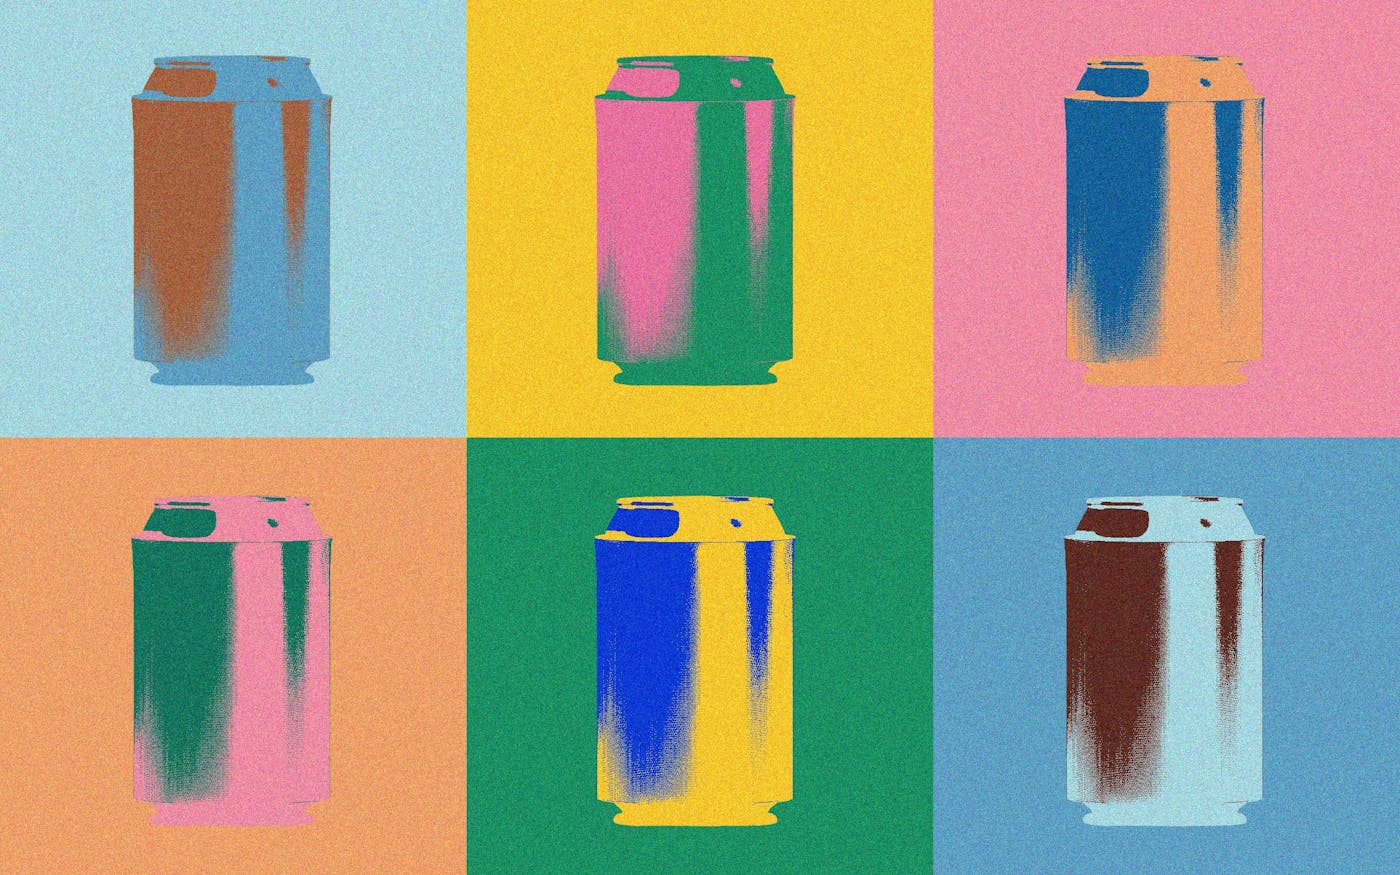 https://img.texasmonthly.com/2023/07/cultural-history-of-koozie.jpg?auto=compress&crop=faces&fit=crop&fm=jpg&h=1050&ixlib=php-3.3.1&q=45&w=1400